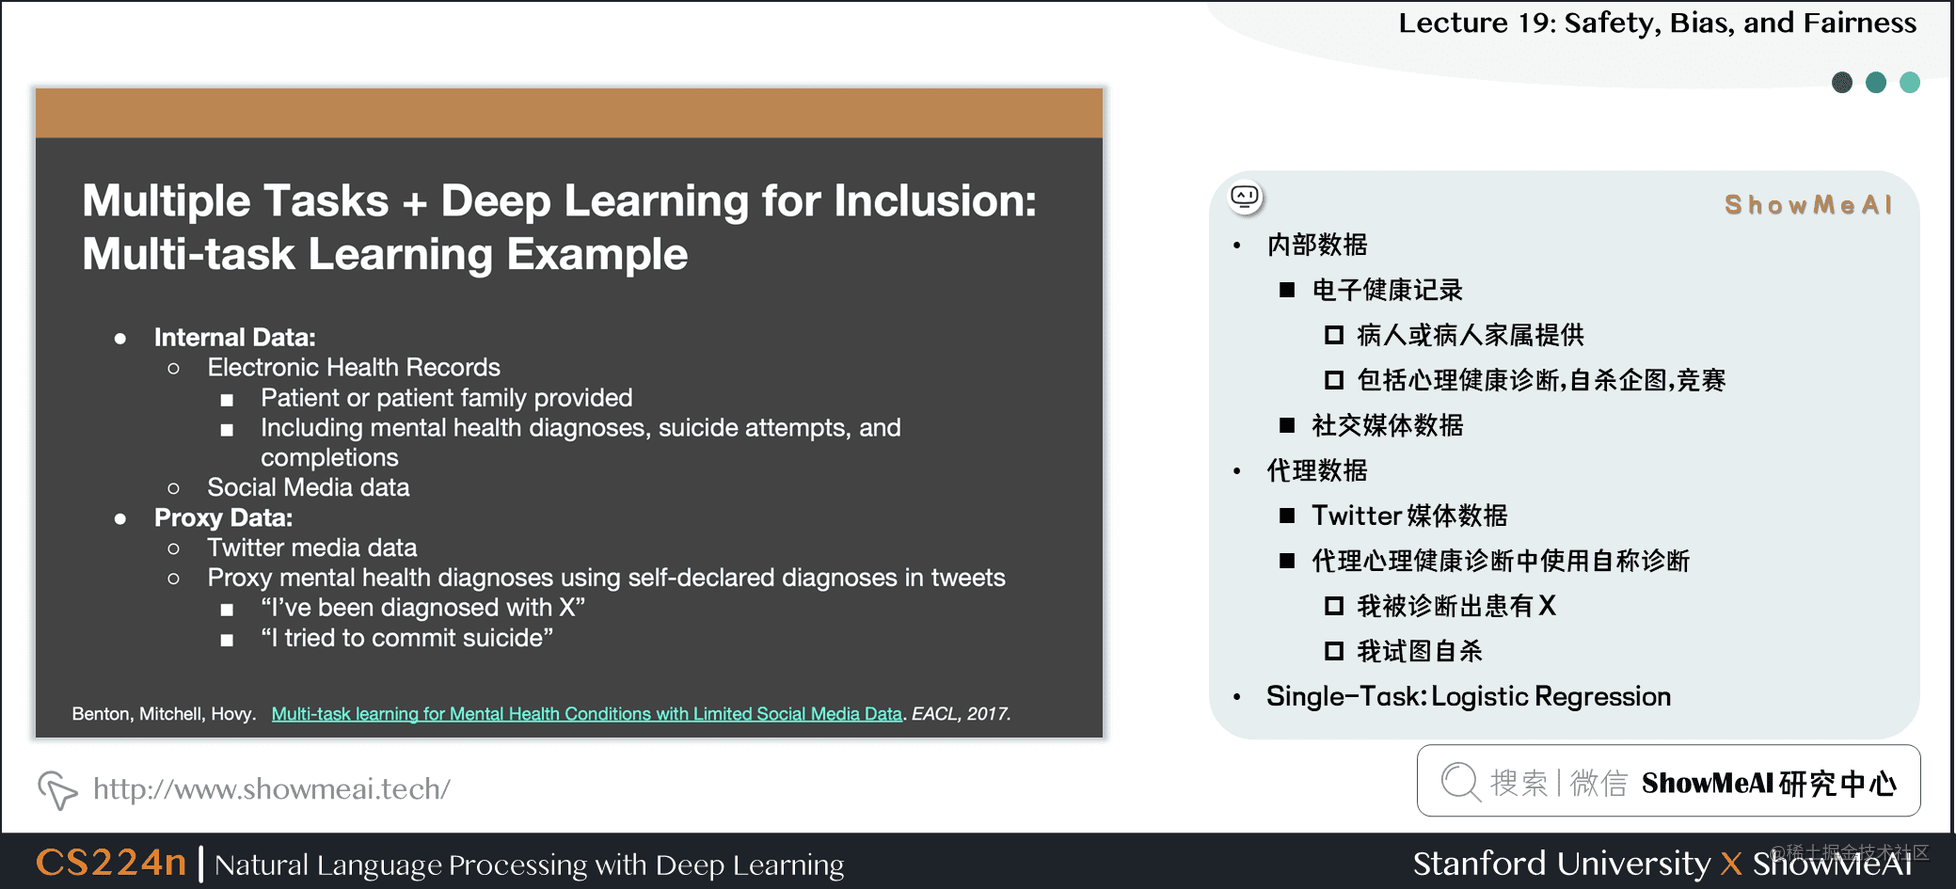 Multiple Tasks + Deep Learning for Inclusion: Multi-task Learning Example